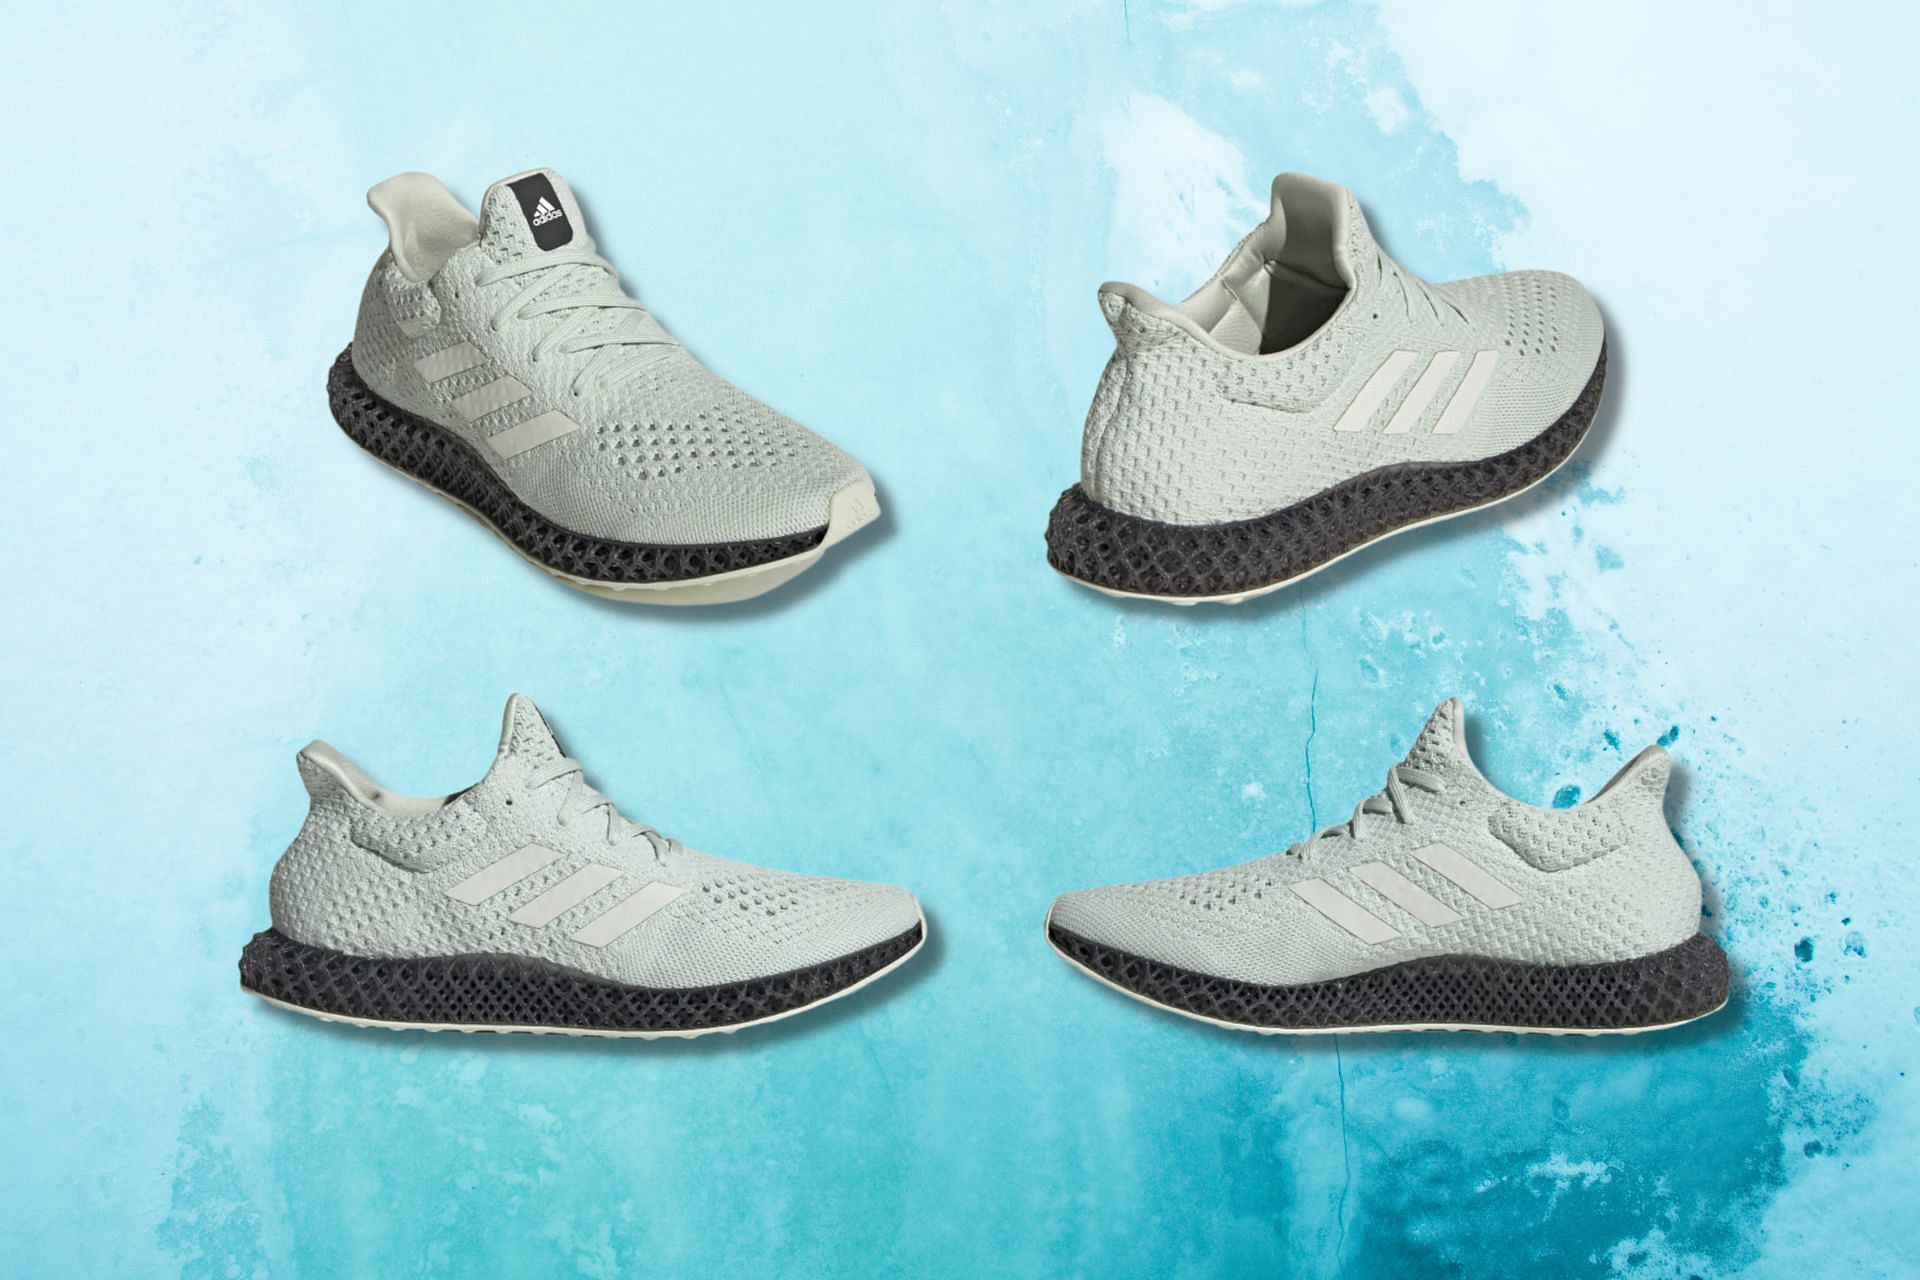 Where to buy Adidas 4D Futurecraft Linen Green? Price, release date ...